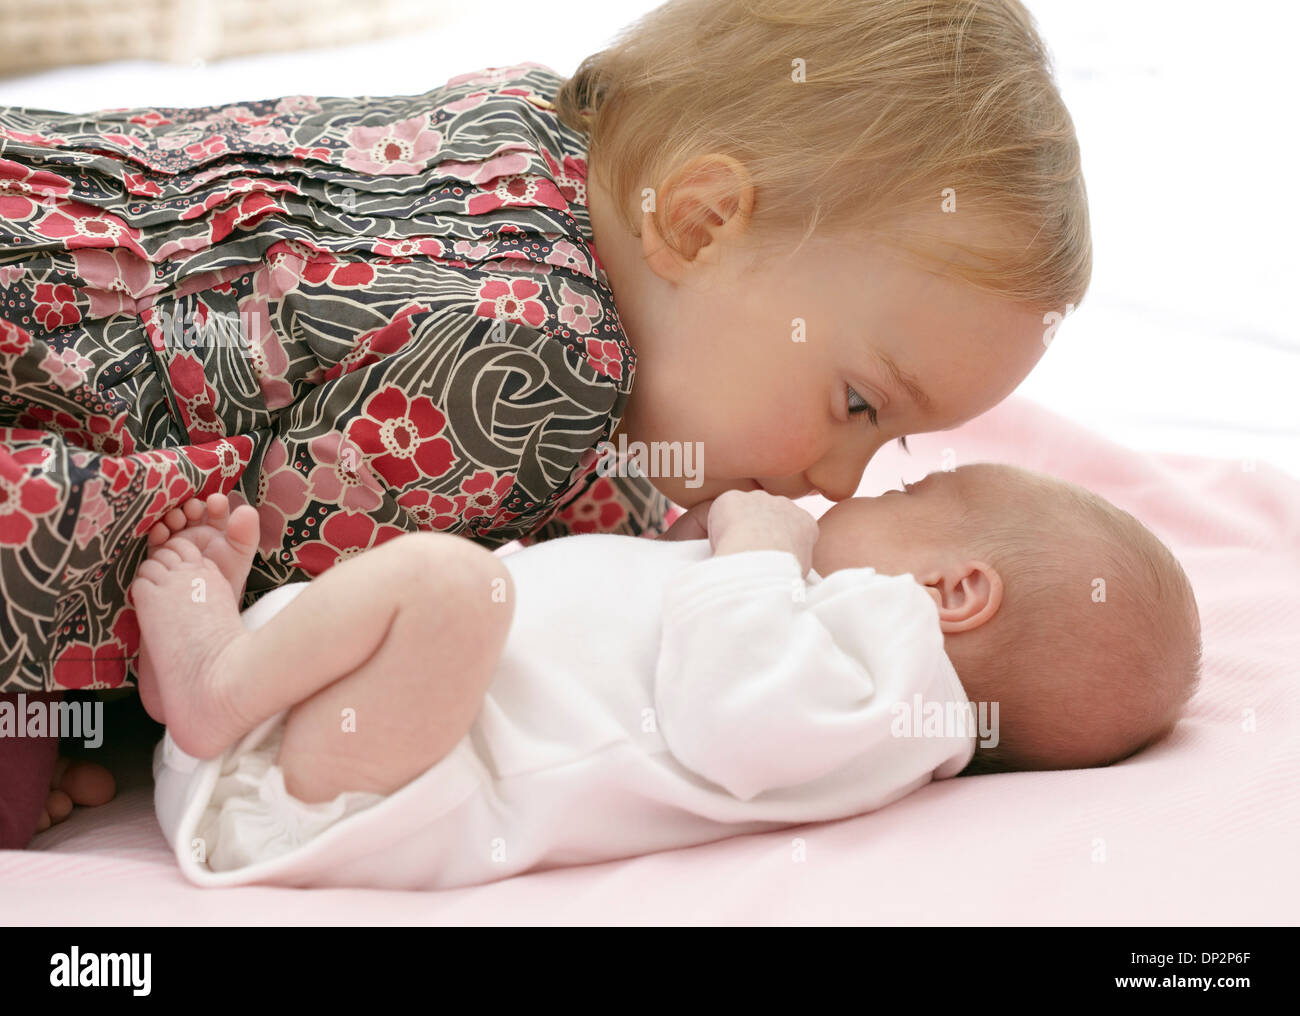 One year old girl with baby sister Stock Photo